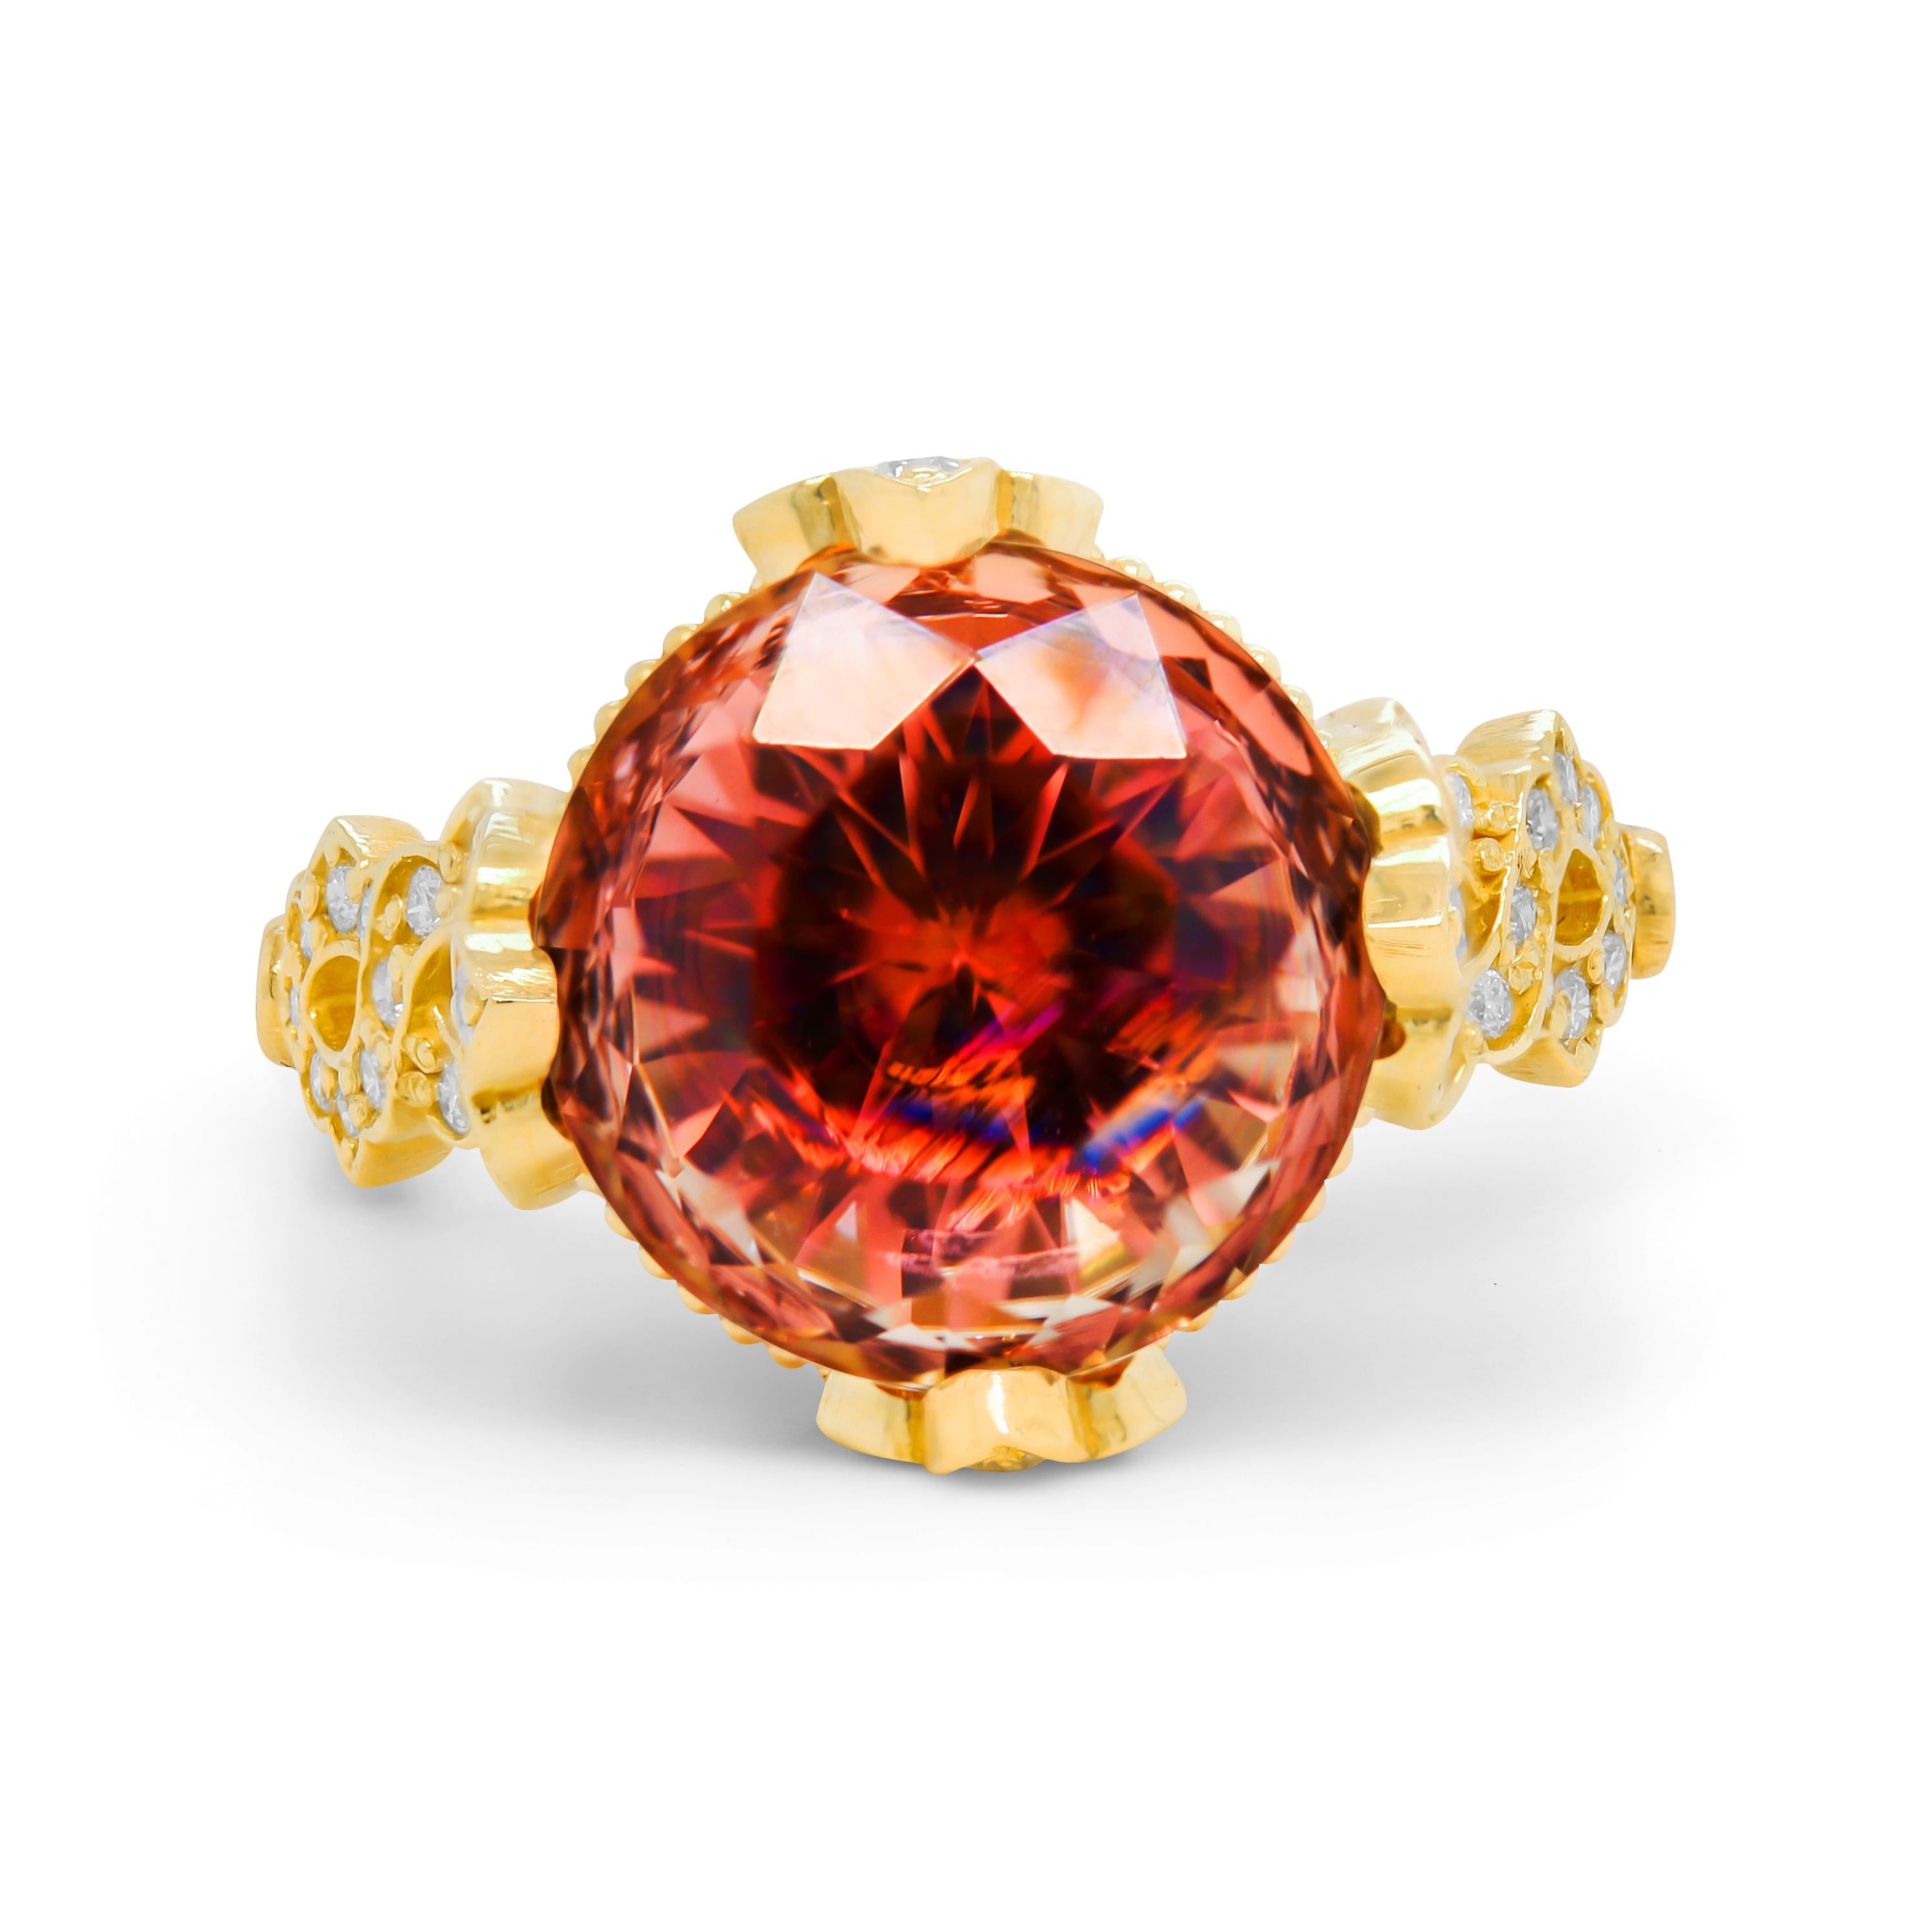 Contemporary Stambolian 18K Gold Diamonds Color Changing Red Orange Pink Tourmaline Ring